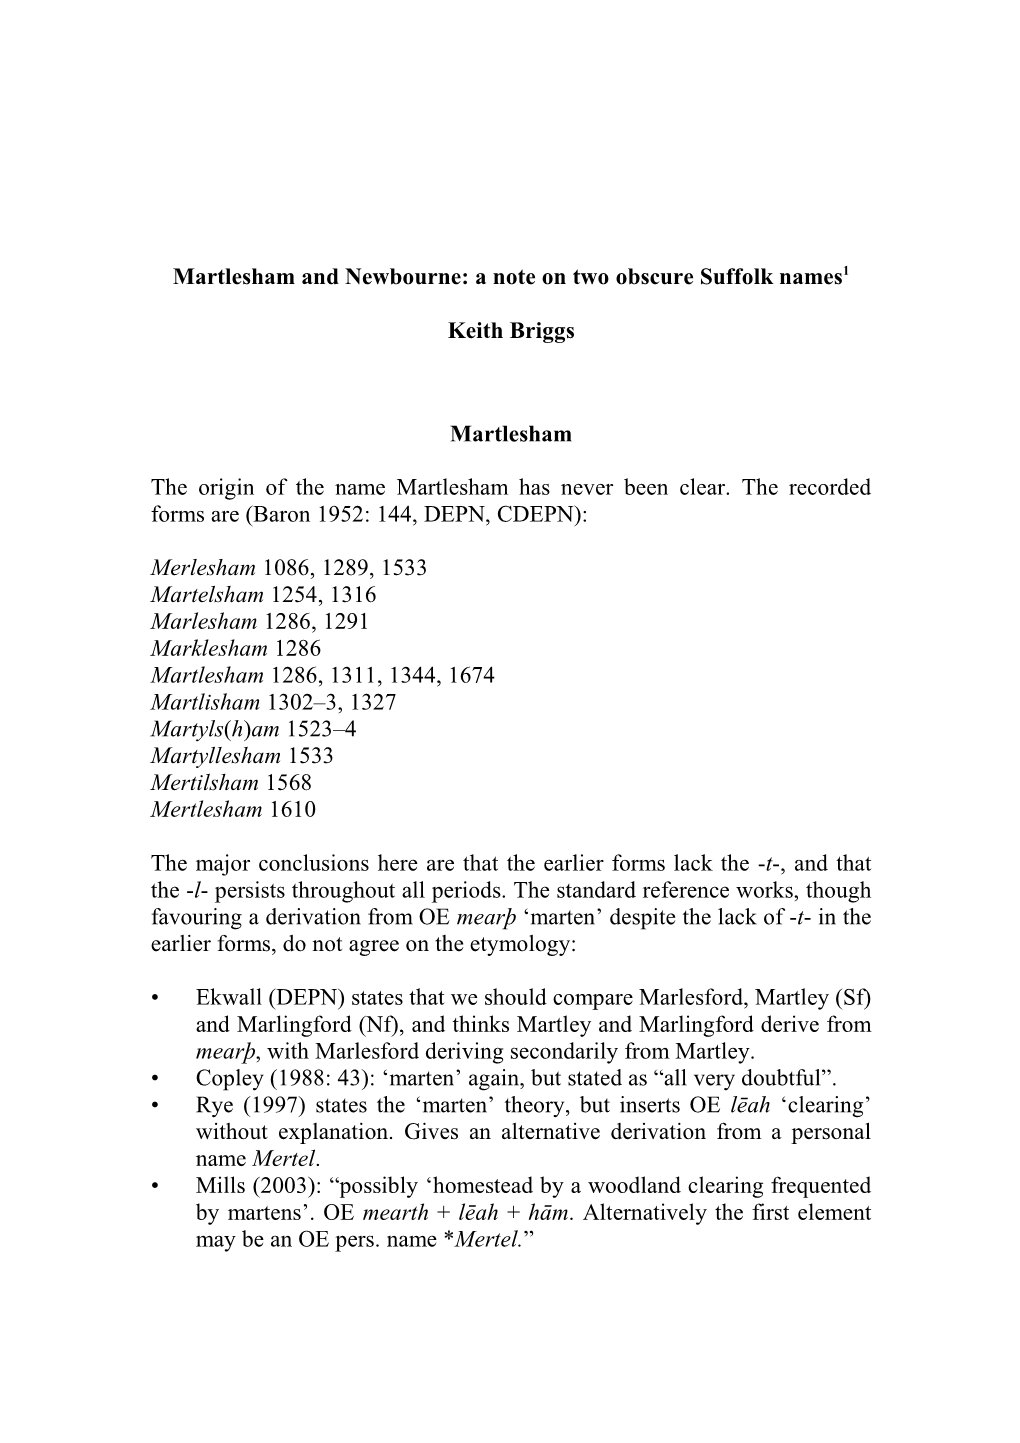 Martlesham and Newbourne: a Note on Two Obscure Suffolk Names1